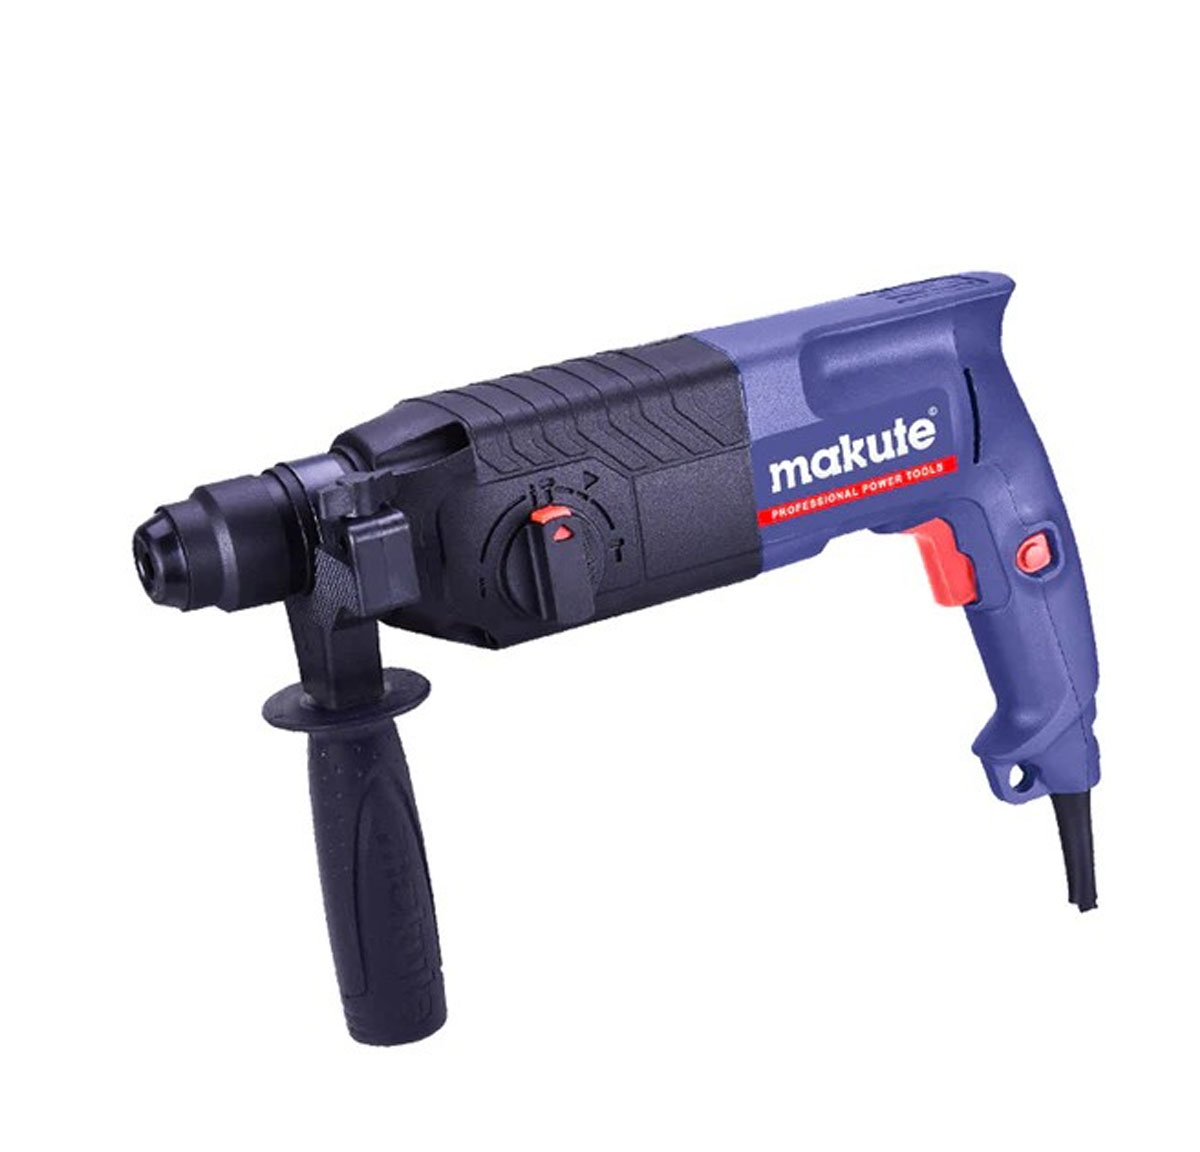 HD003 ROTARY HAMMER ELECTRIC MACHINE 3 FUNCTION 24MM HILTY DRILL 620W